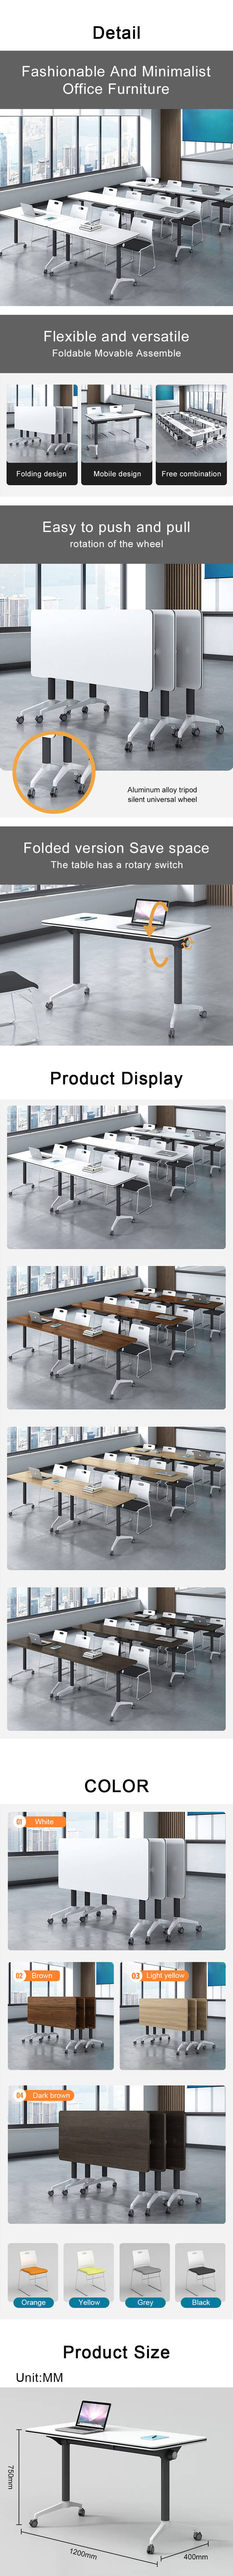 Spliceable conference table